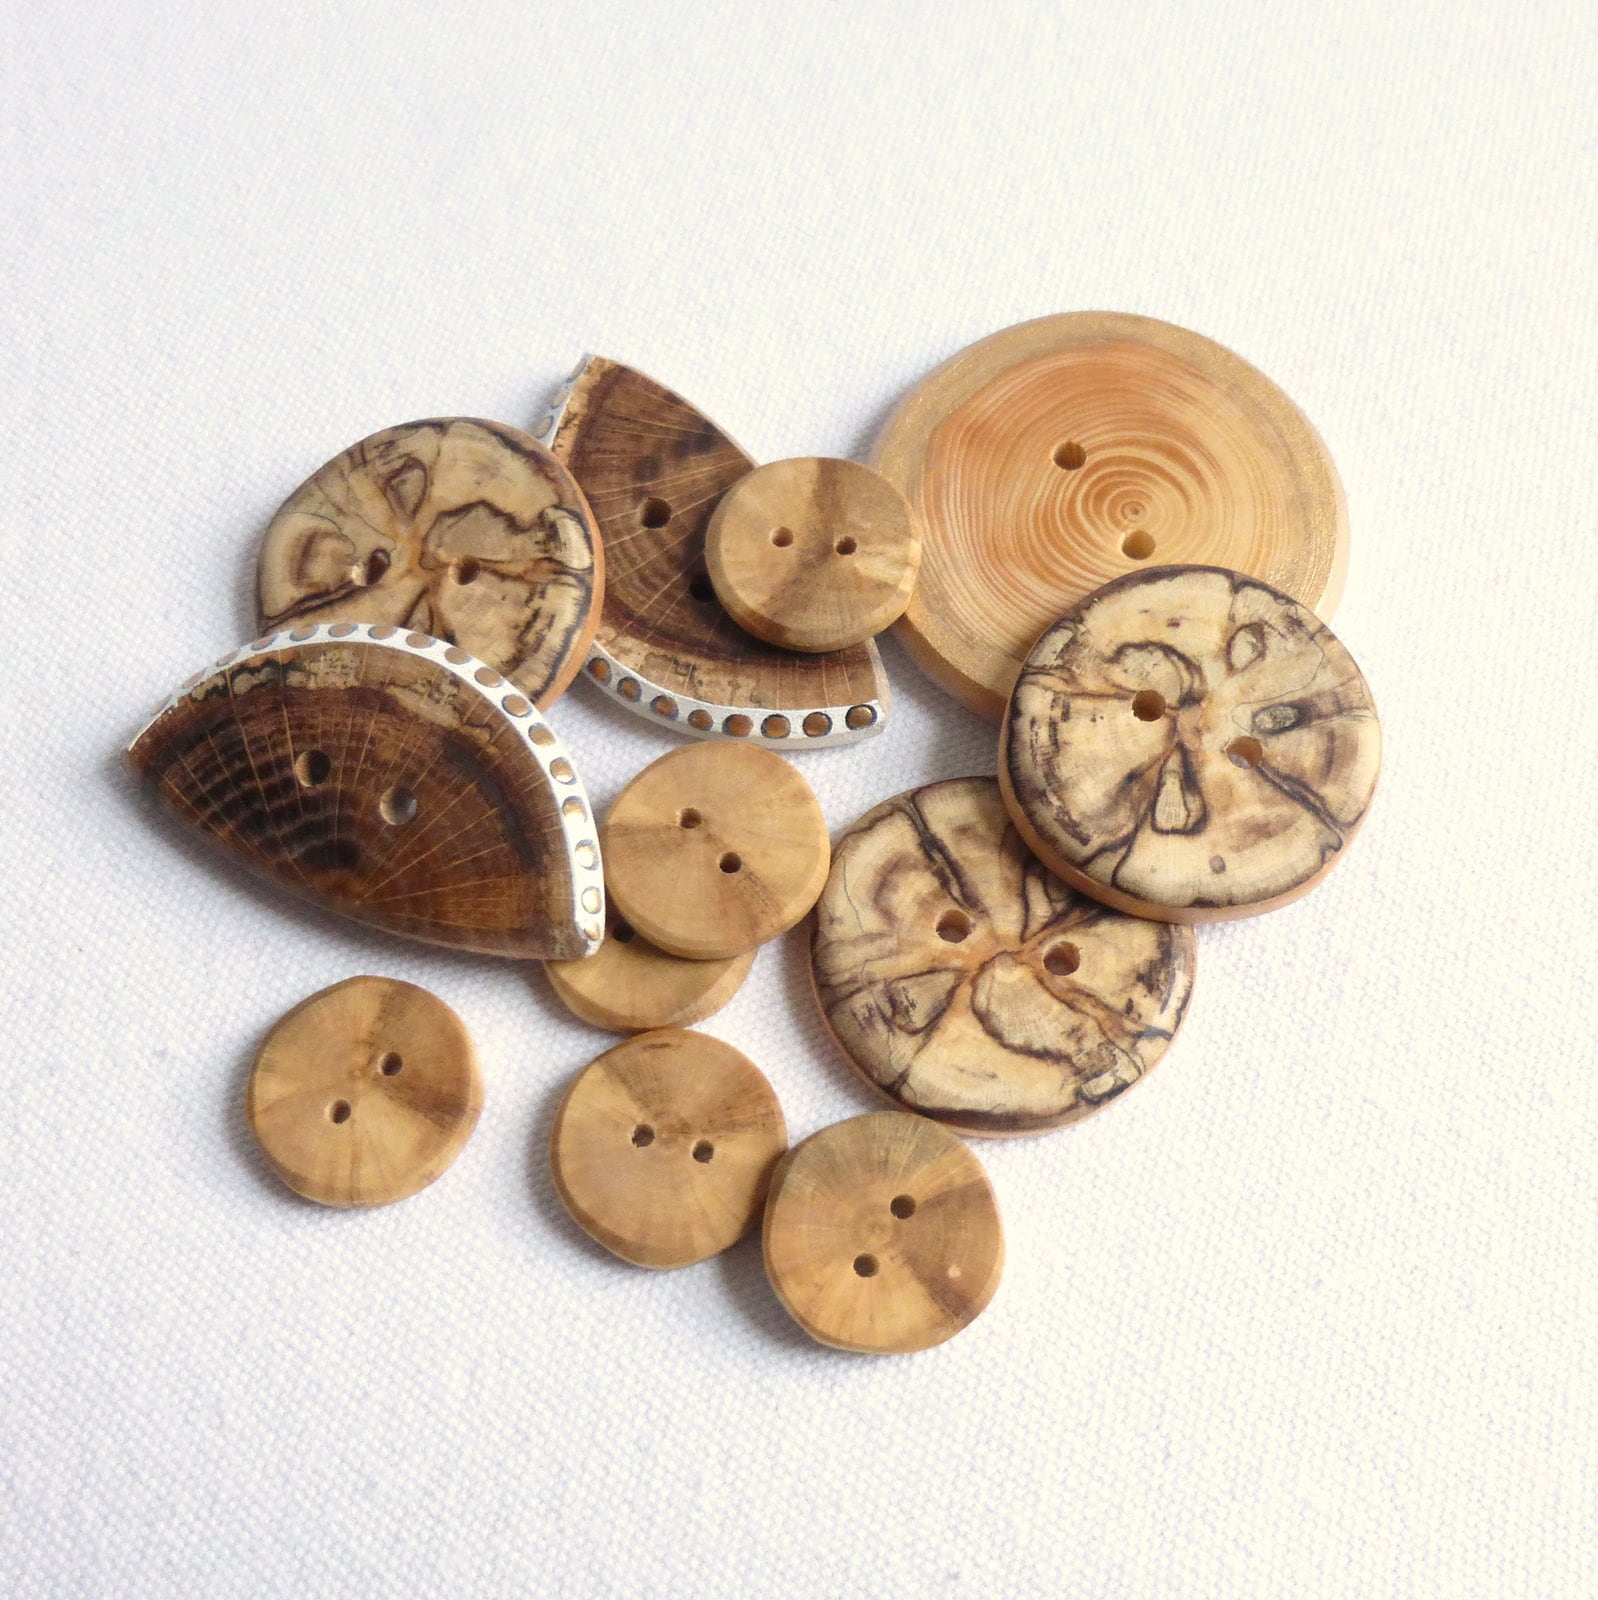 Unfinished Wooden Buttons for Crafts and Sewing 1/2 inch Bulk Pack of 100 Decorative Buttons by Woodpeckers